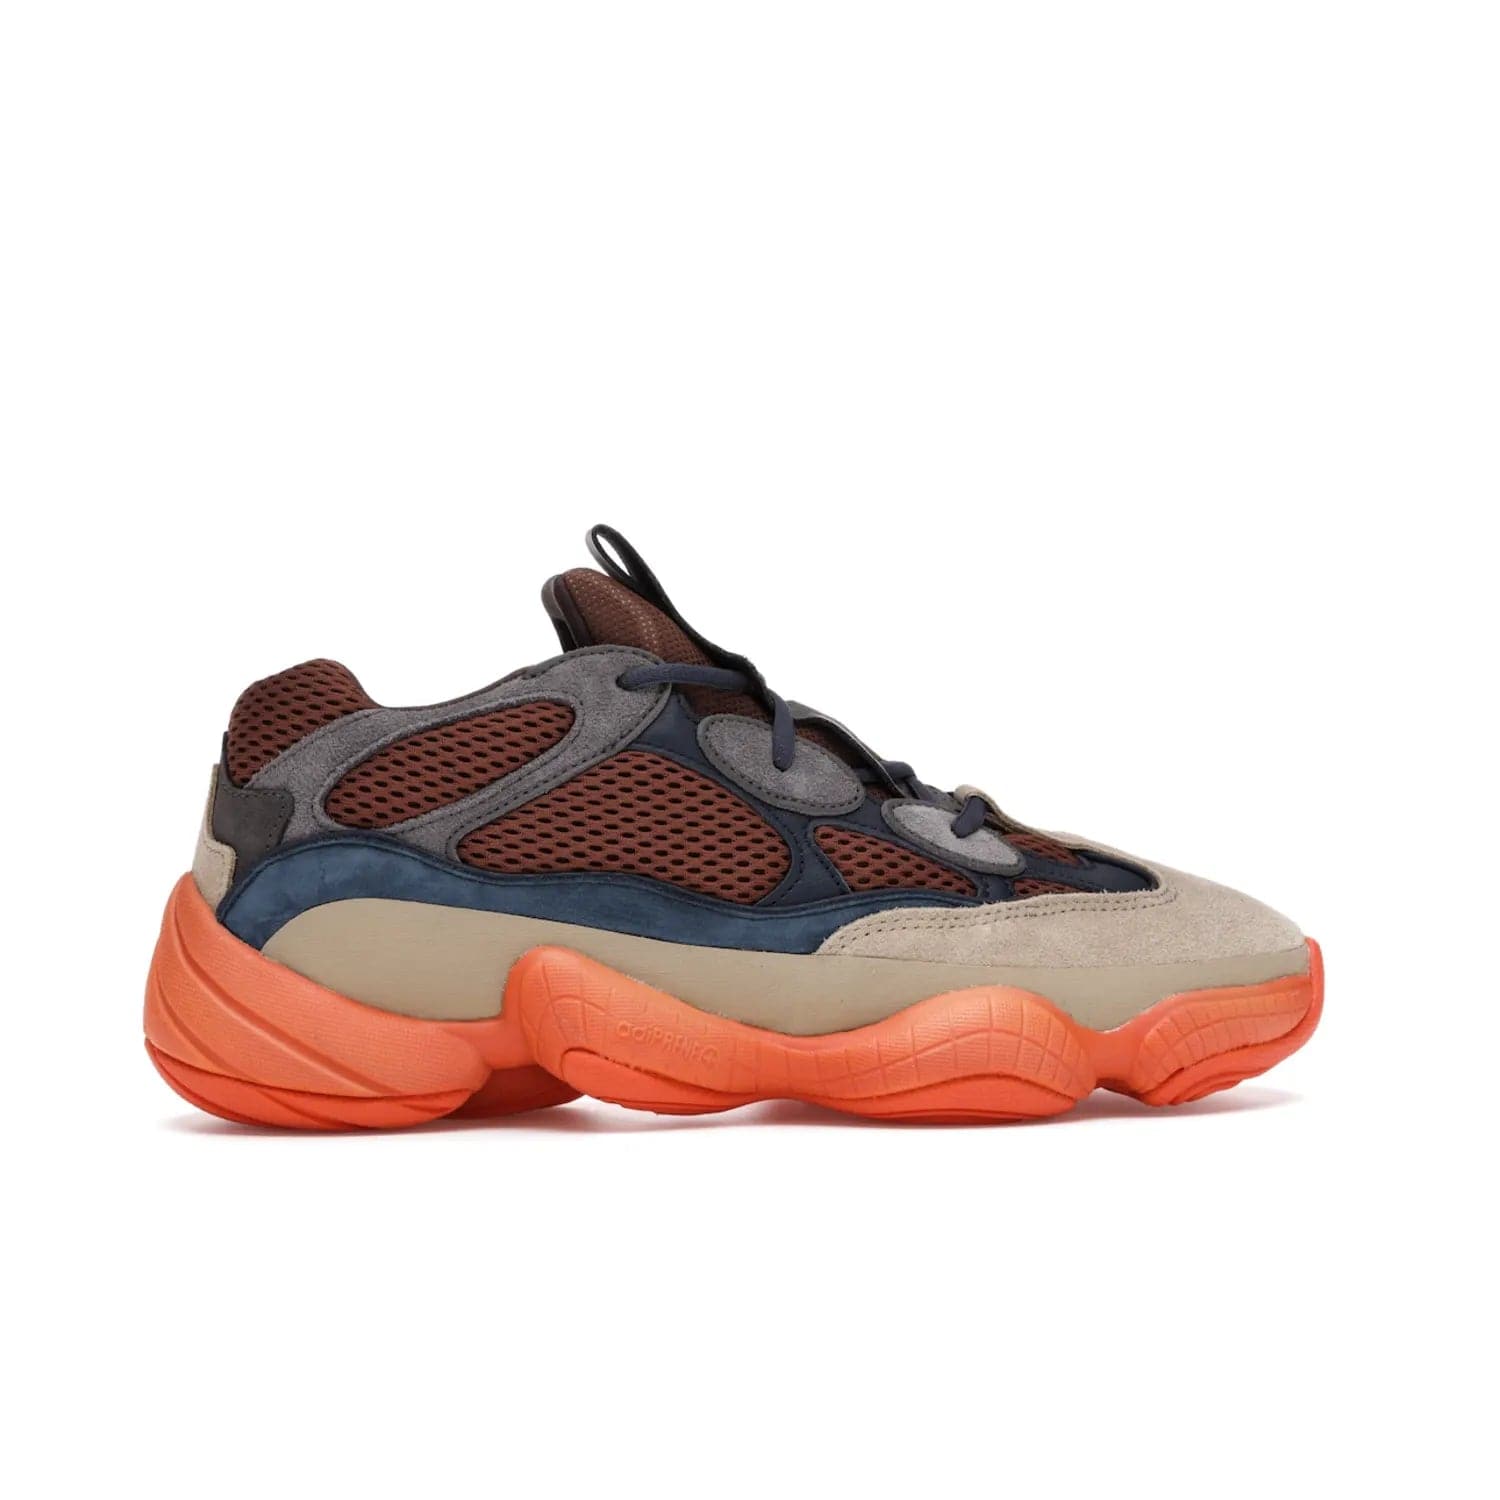 adidas Yeezy 500 Enflame - Image 36 - Only at www.BallersClubKickz.com - Step into style with the adidas Yeezy 500 Enflame. Mix of mesh, leather, and suede layered together to create tonal-brown, dark blue, & orange. Orange AdiPRENE sole provides superior cushioning & comfort. Get yours and experience maximum style.